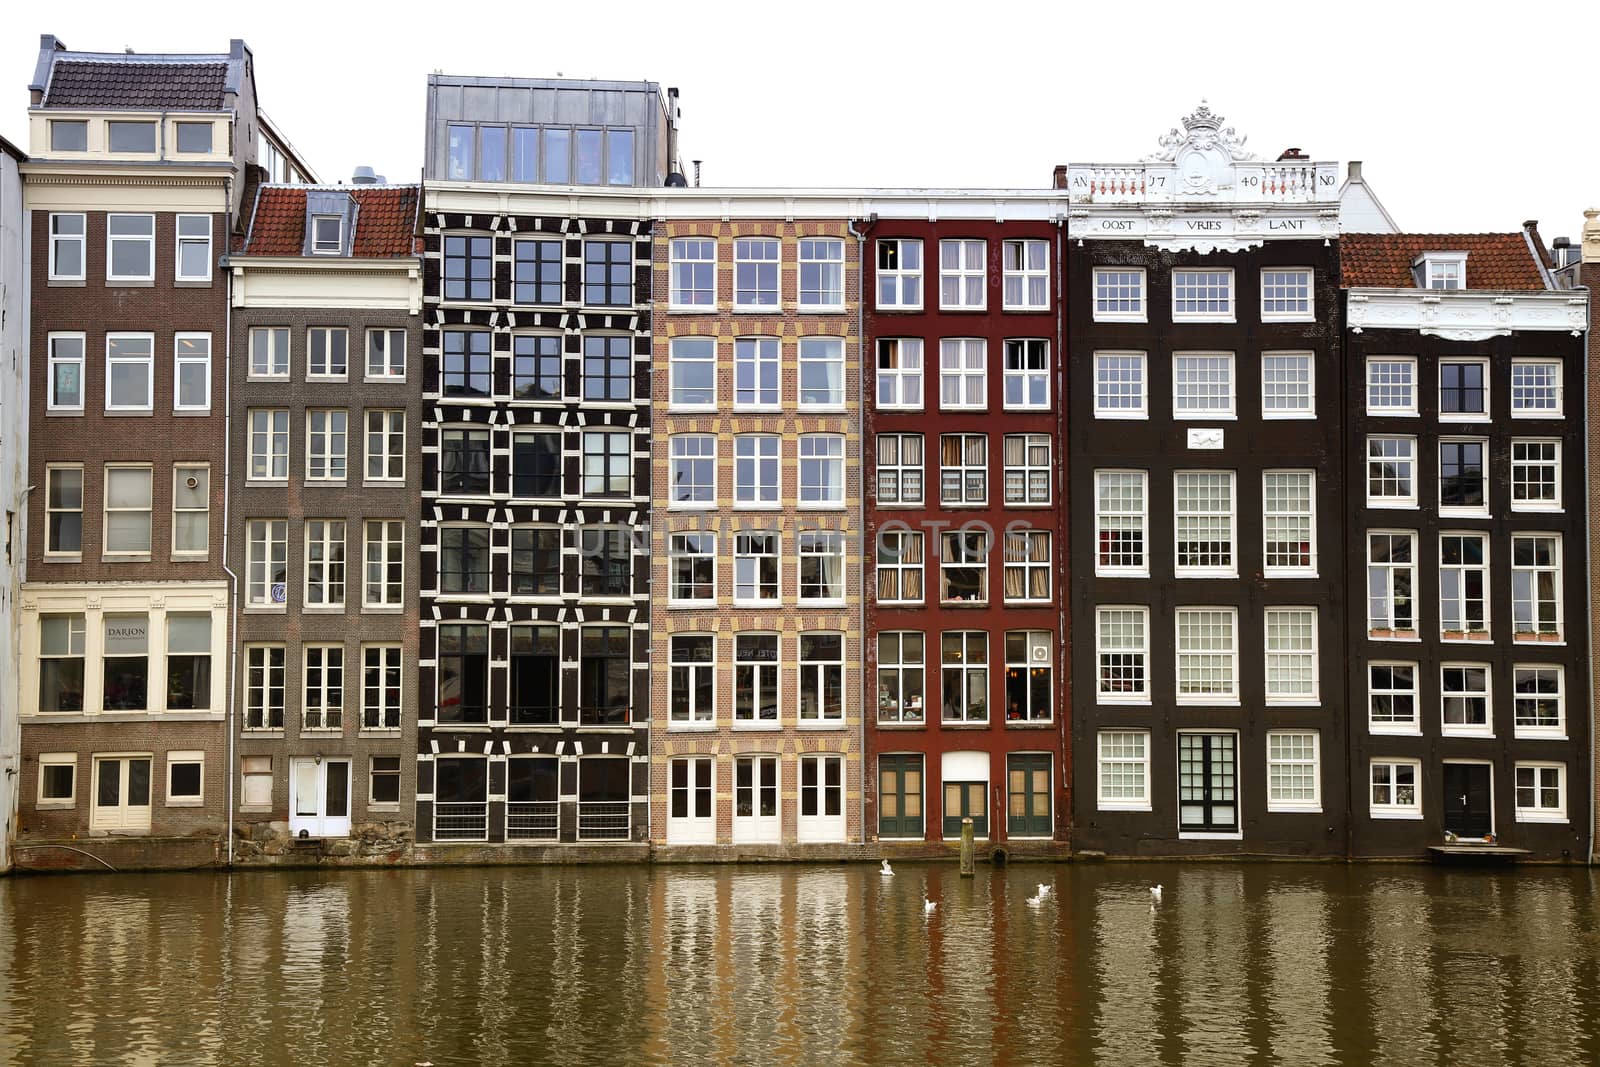 AMSTERDAM; THE NETHERLANDS - AUGUST 16; 2015: Beautiful views of the ancient buildings at the waterside, Damrak canal in Amsterdam. Amsterdam is capital of the Netherlands on August 16; 2015.
